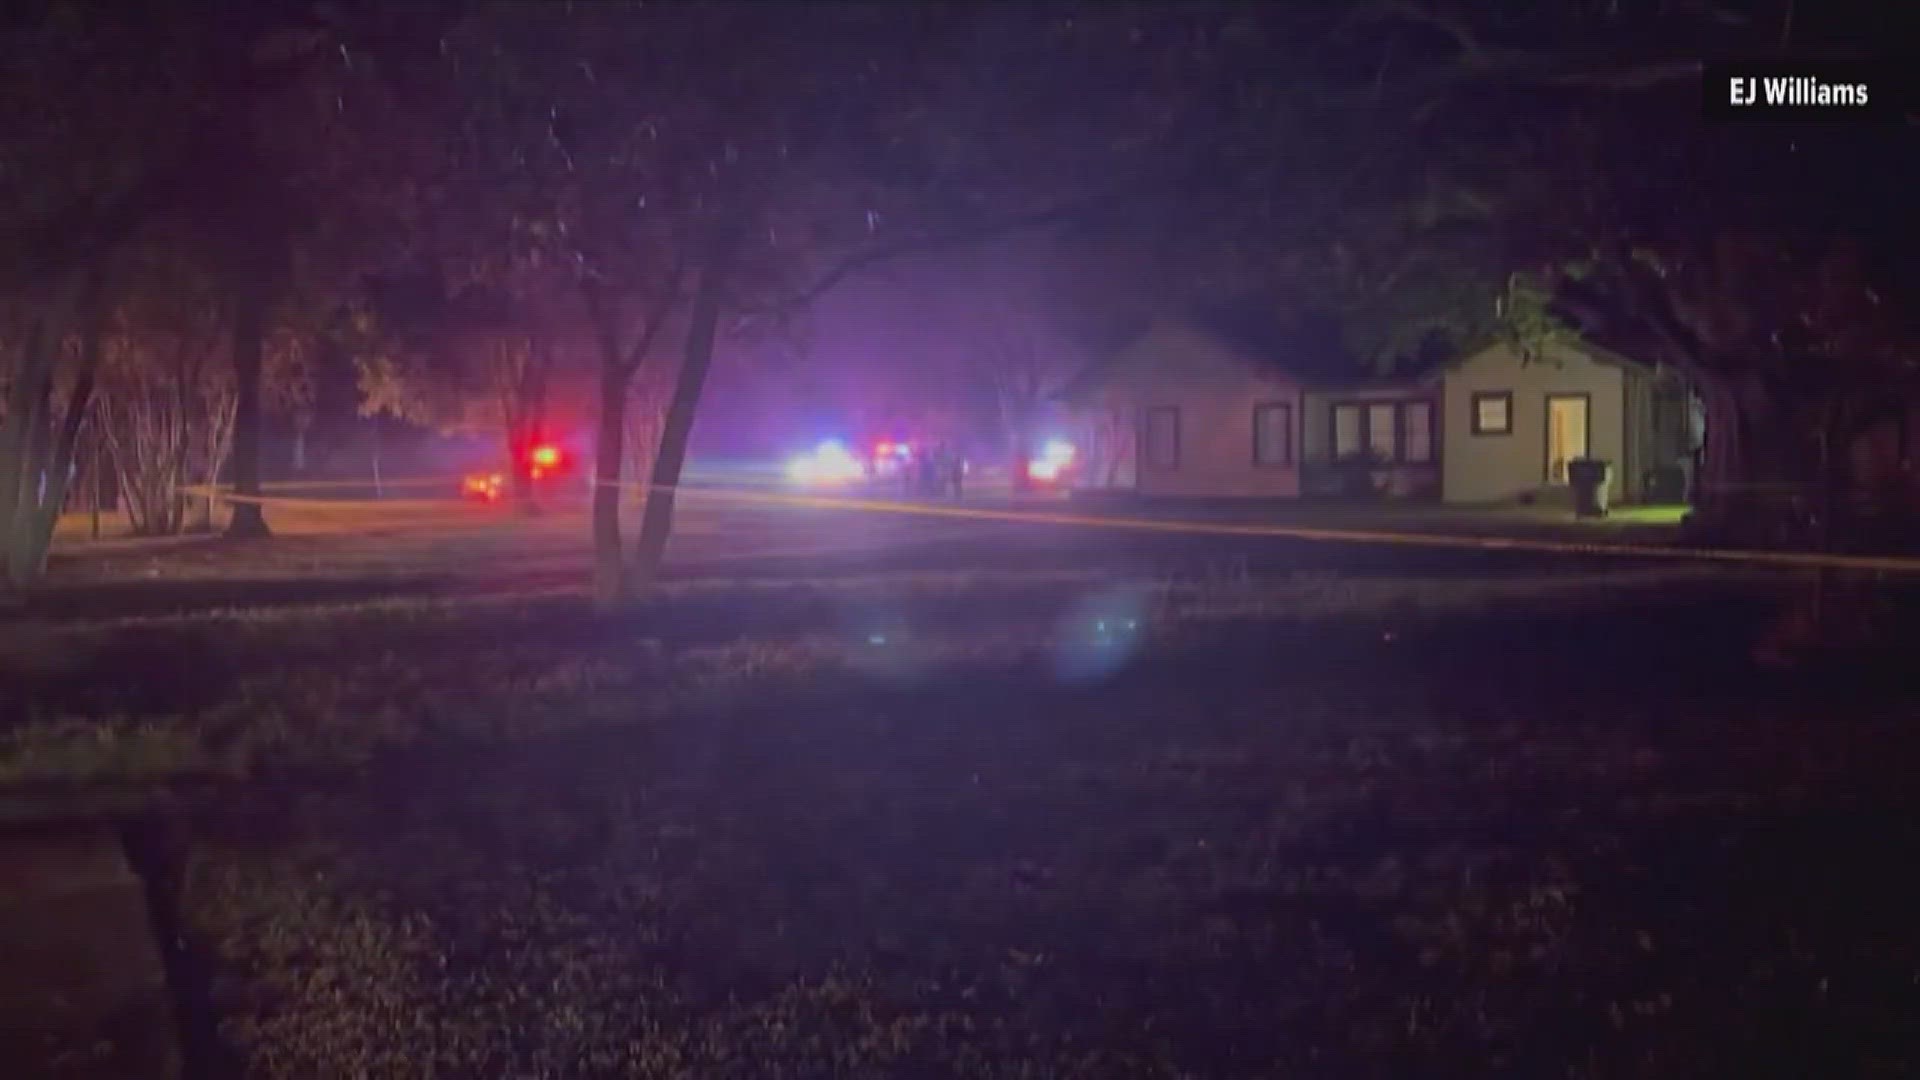 Police say two suspects walked into the backyard of a home during a party and began shooting.